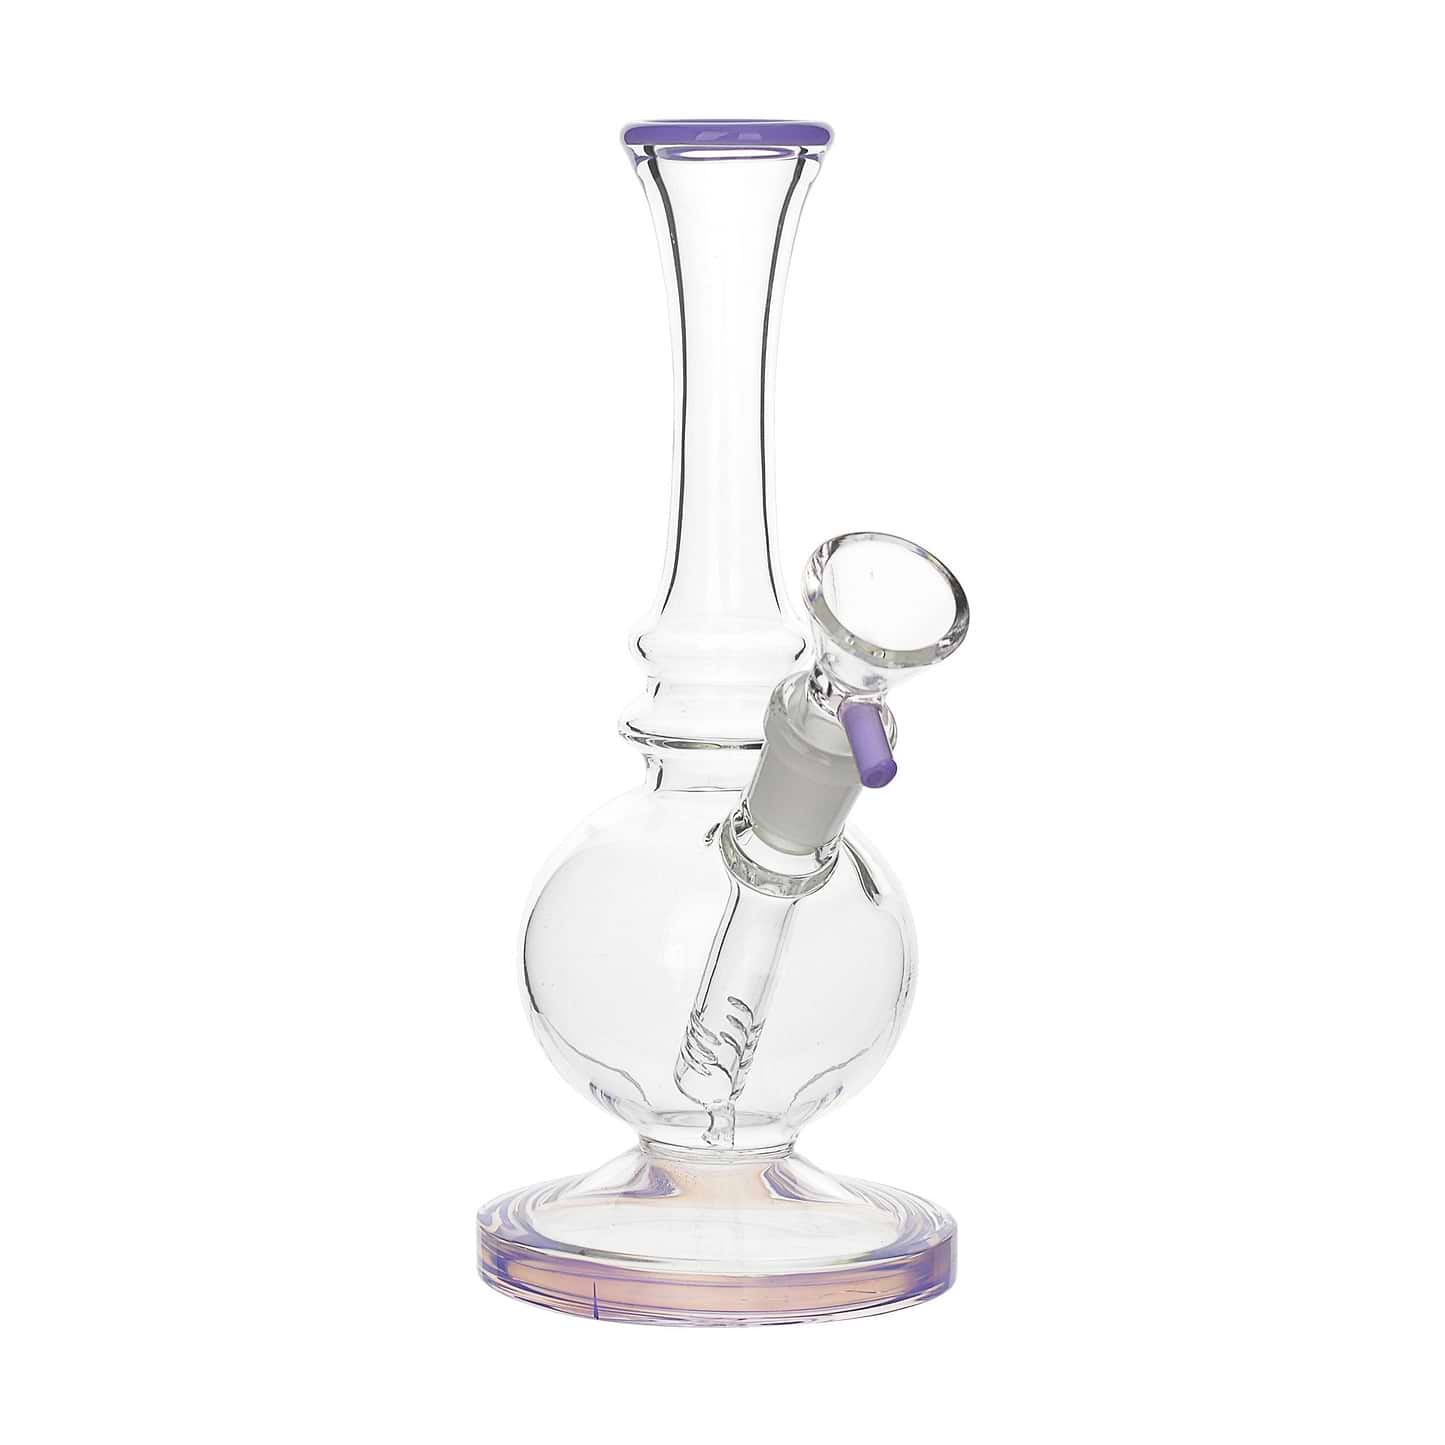 7.5-inch glass bong smoking device with elegant curves slide handle lab or genie-in-a-bottle look purple tip and bottom